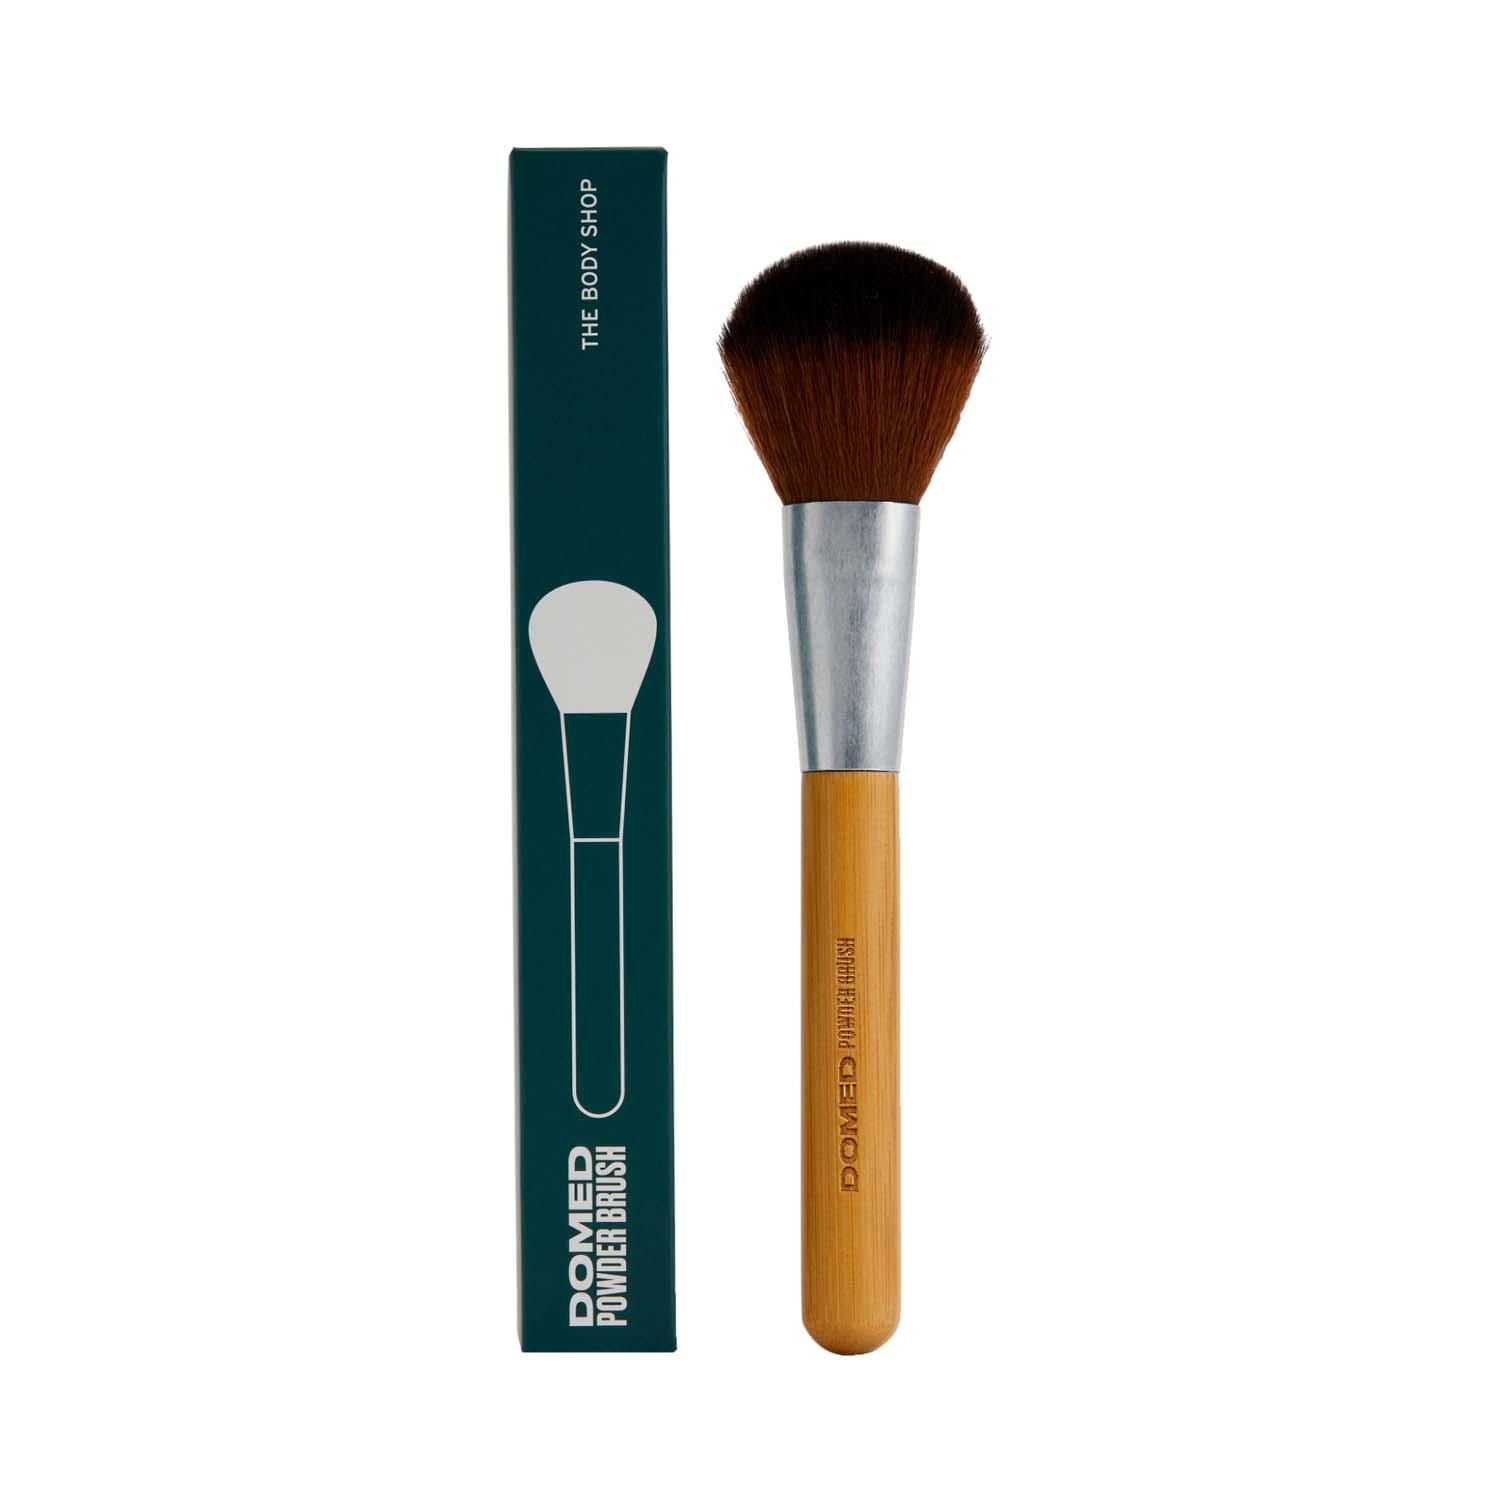 The Body Shop | The Body Shop Domed Powder Face Brush